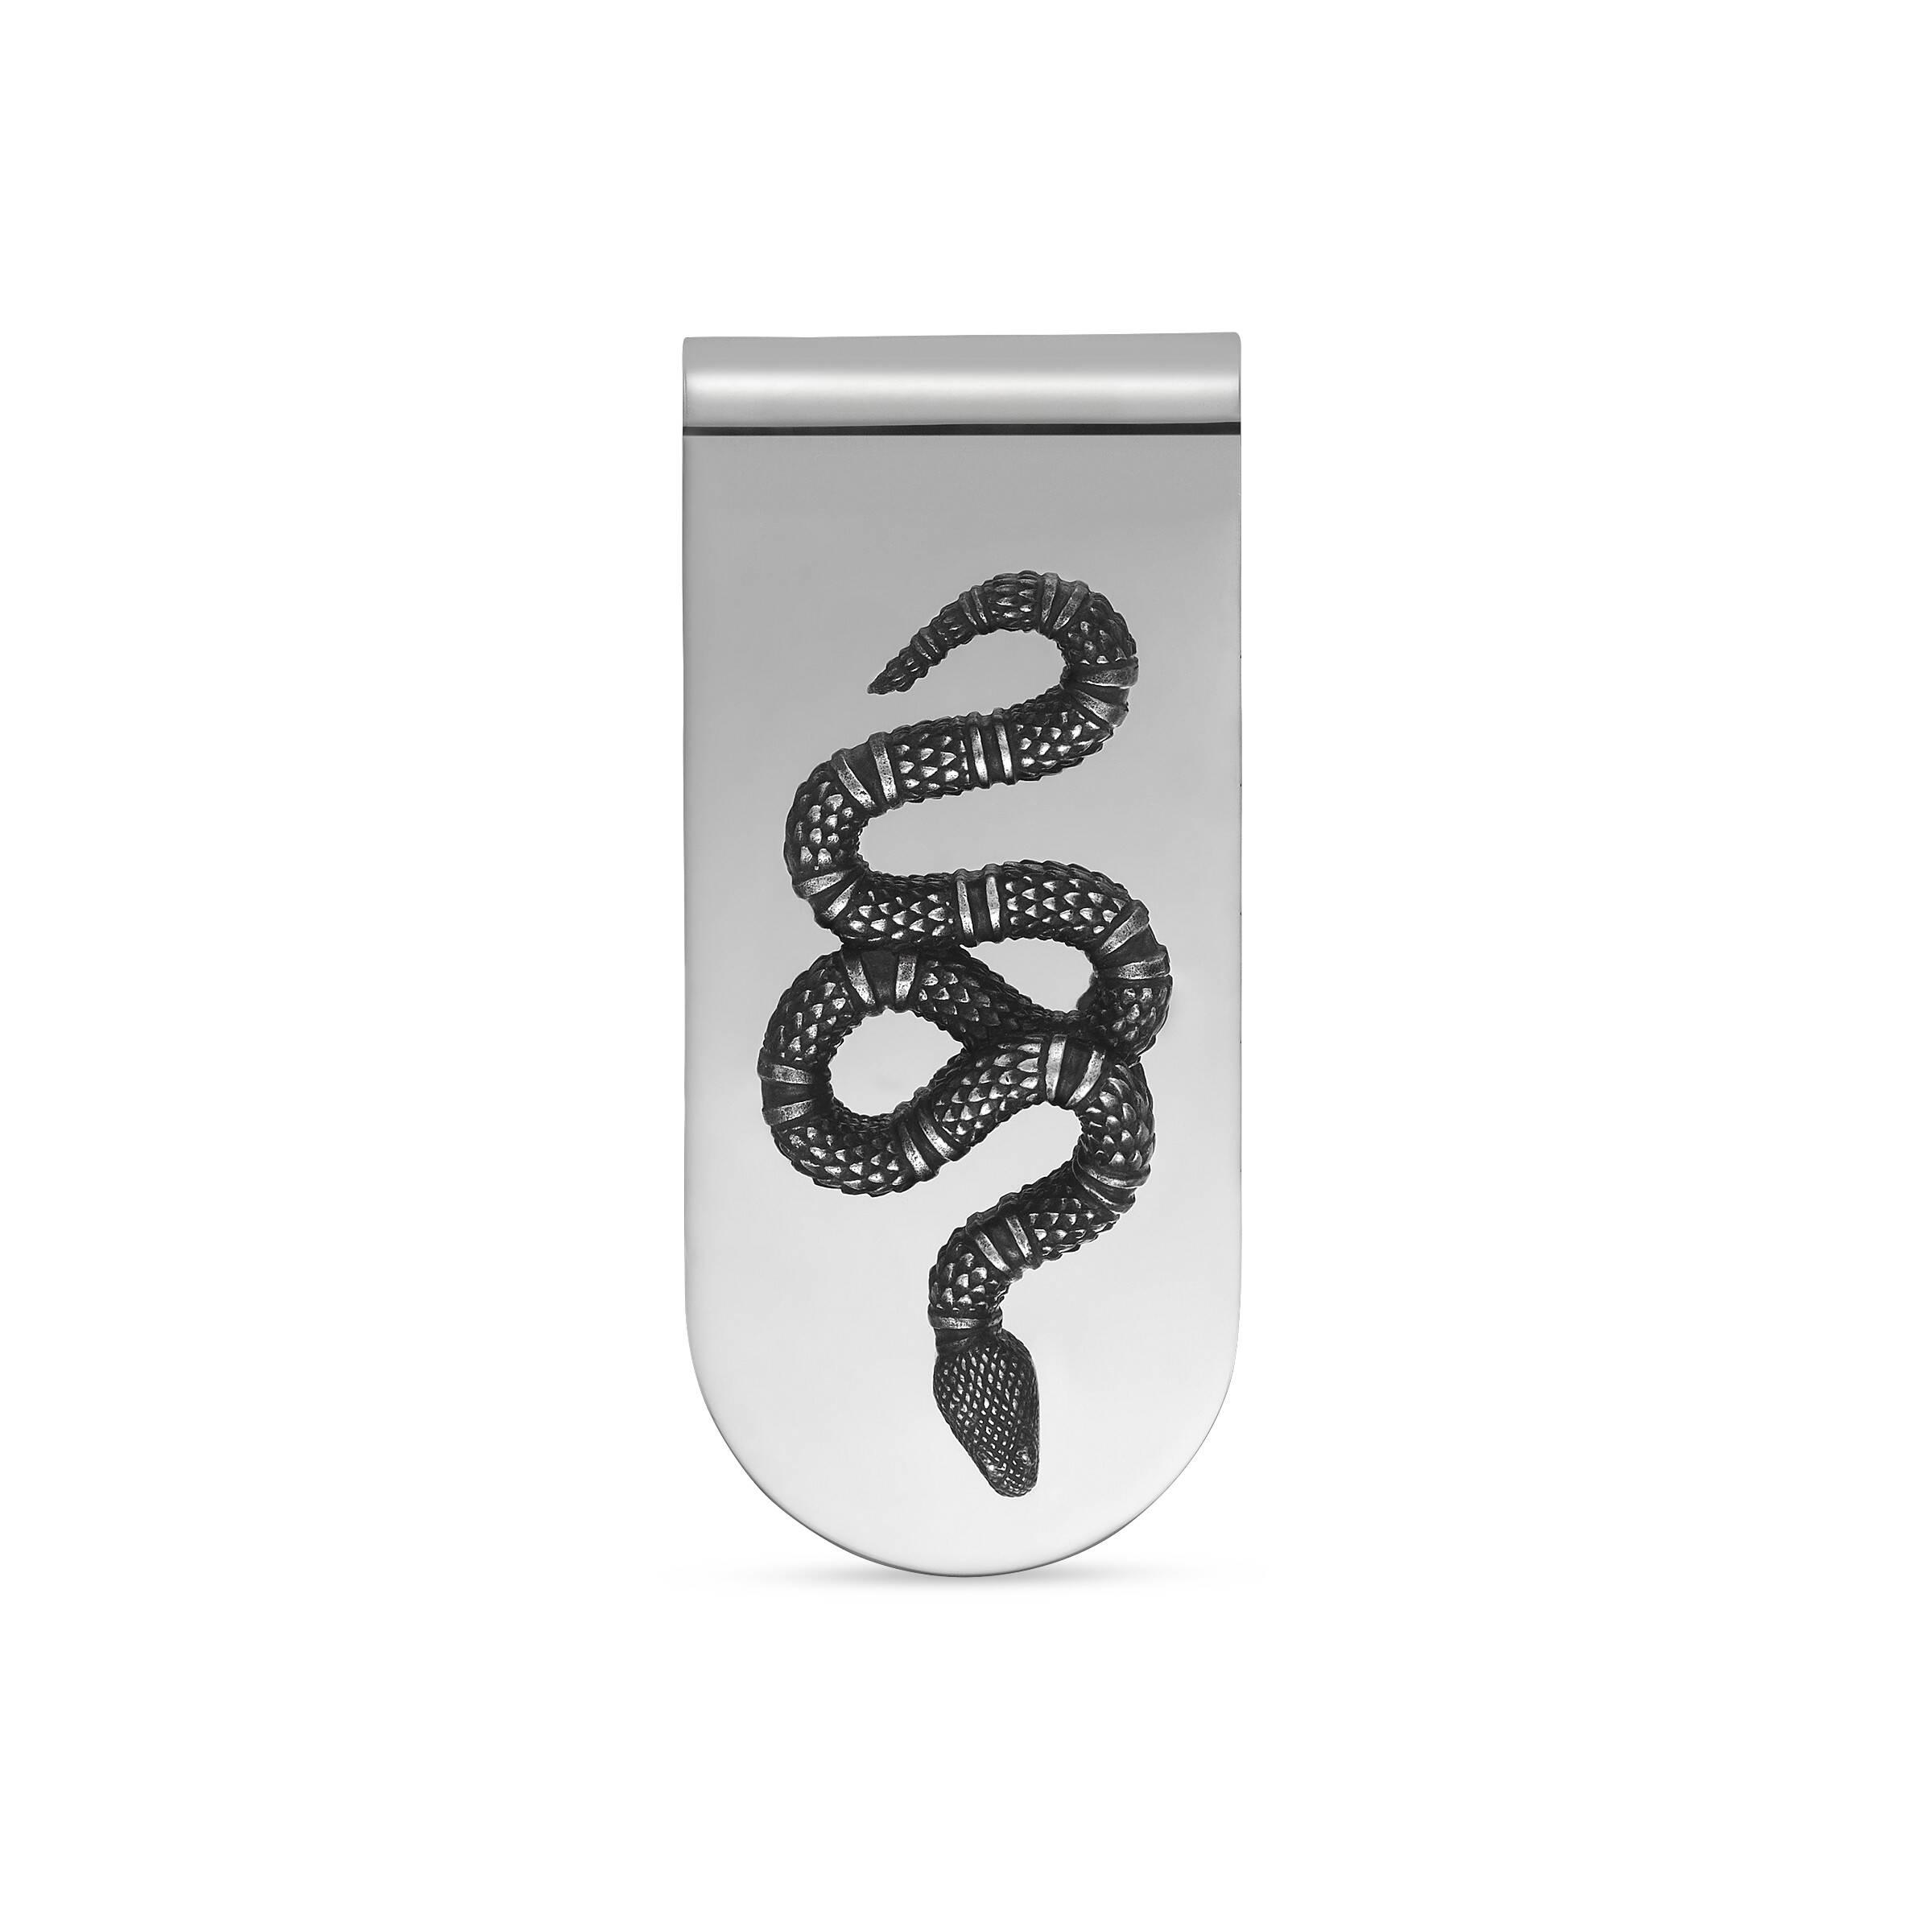 Gucci Snake-engraved Silver Money Clip in Metallic for Men